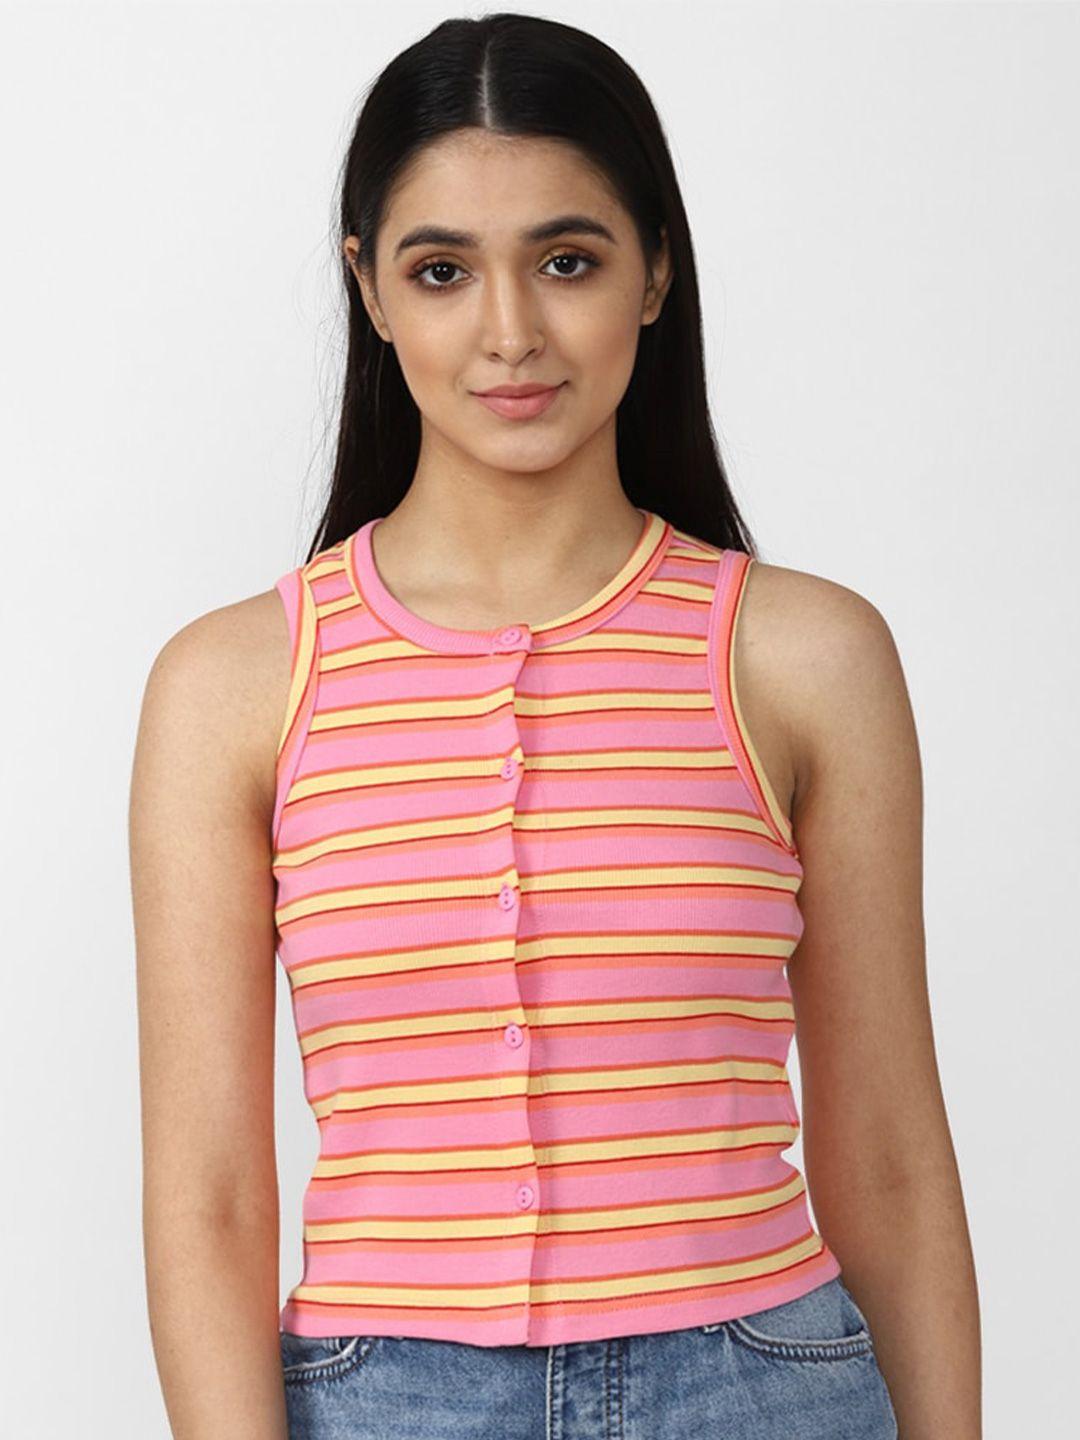 forever 21 women pink striped top